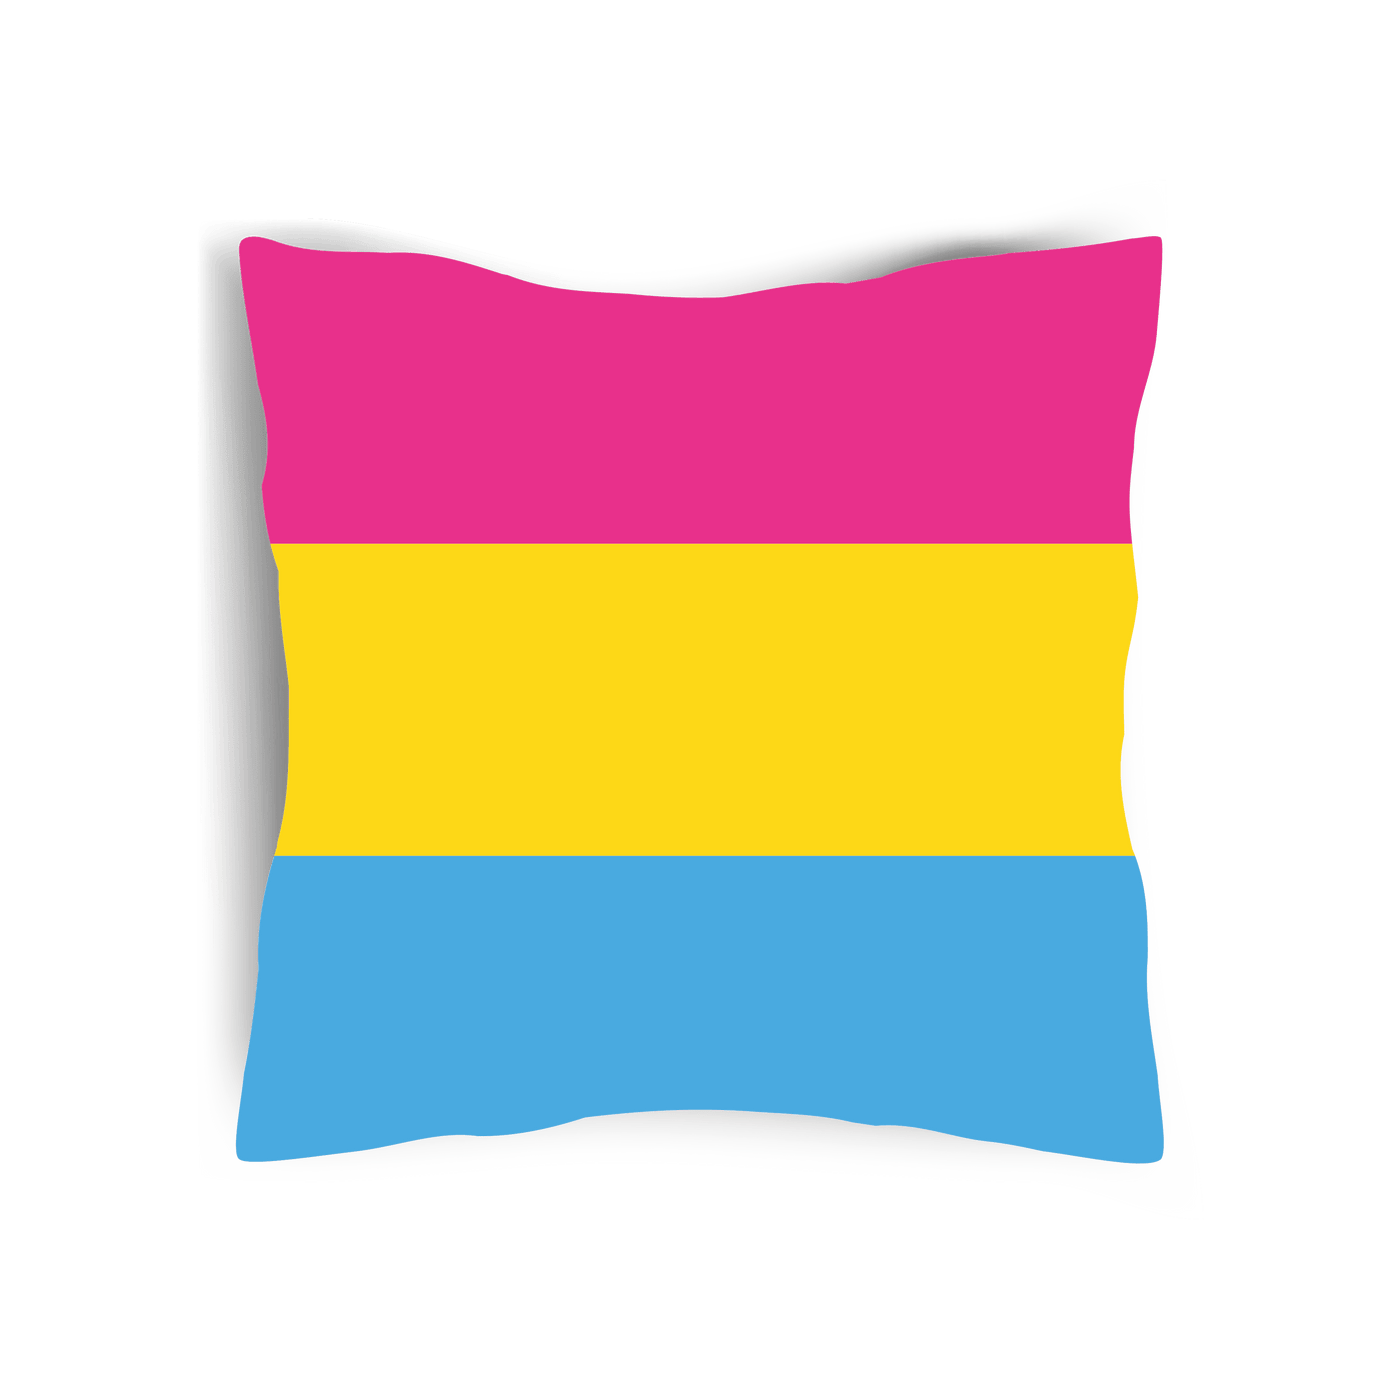 Pansexual Pride Cushion Flags And Flagpoles 0802